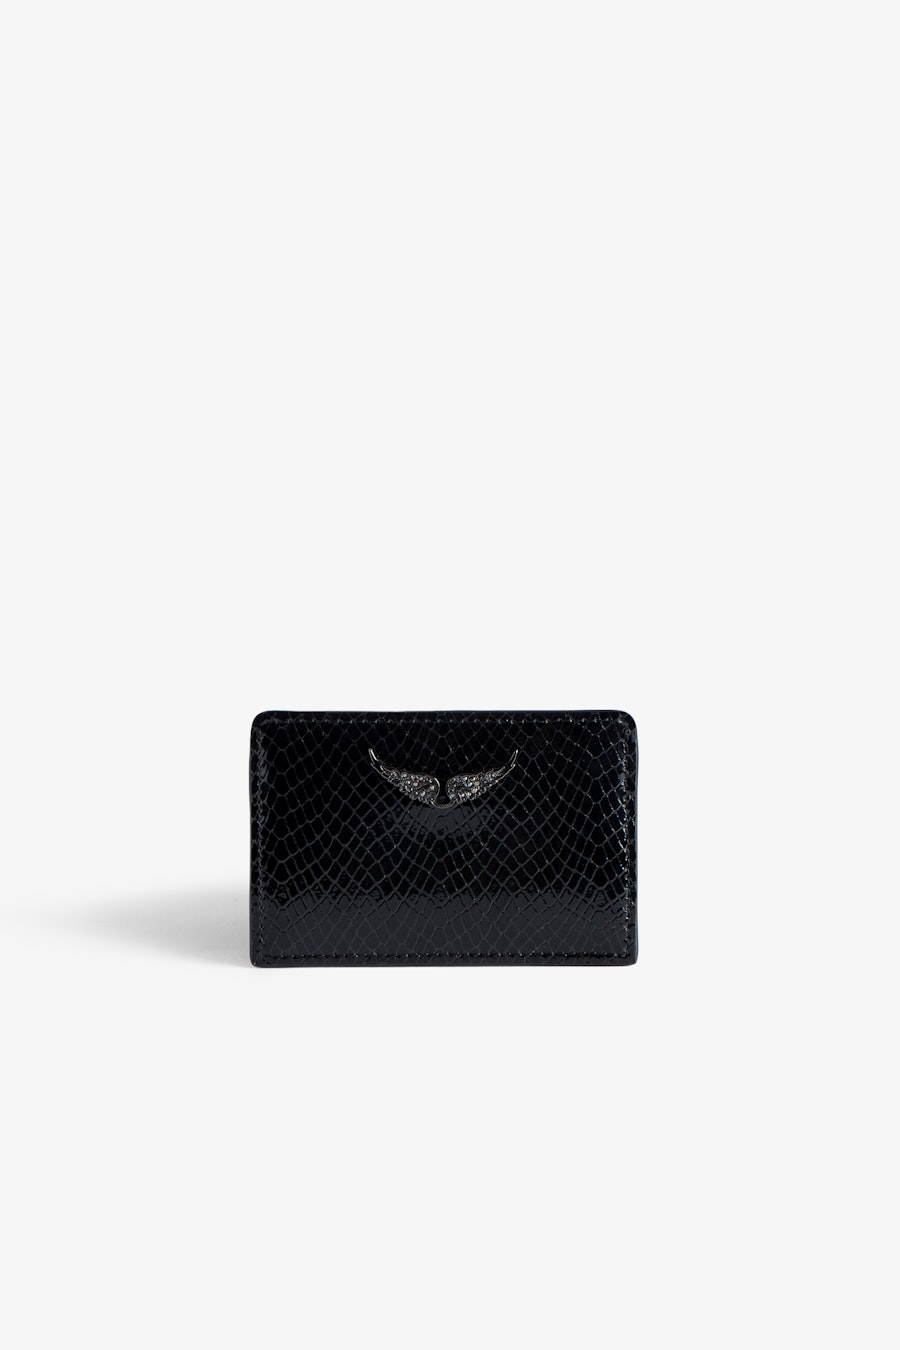 ZADIG&VOLTAIRE ZV Pass Embossed Card Holder